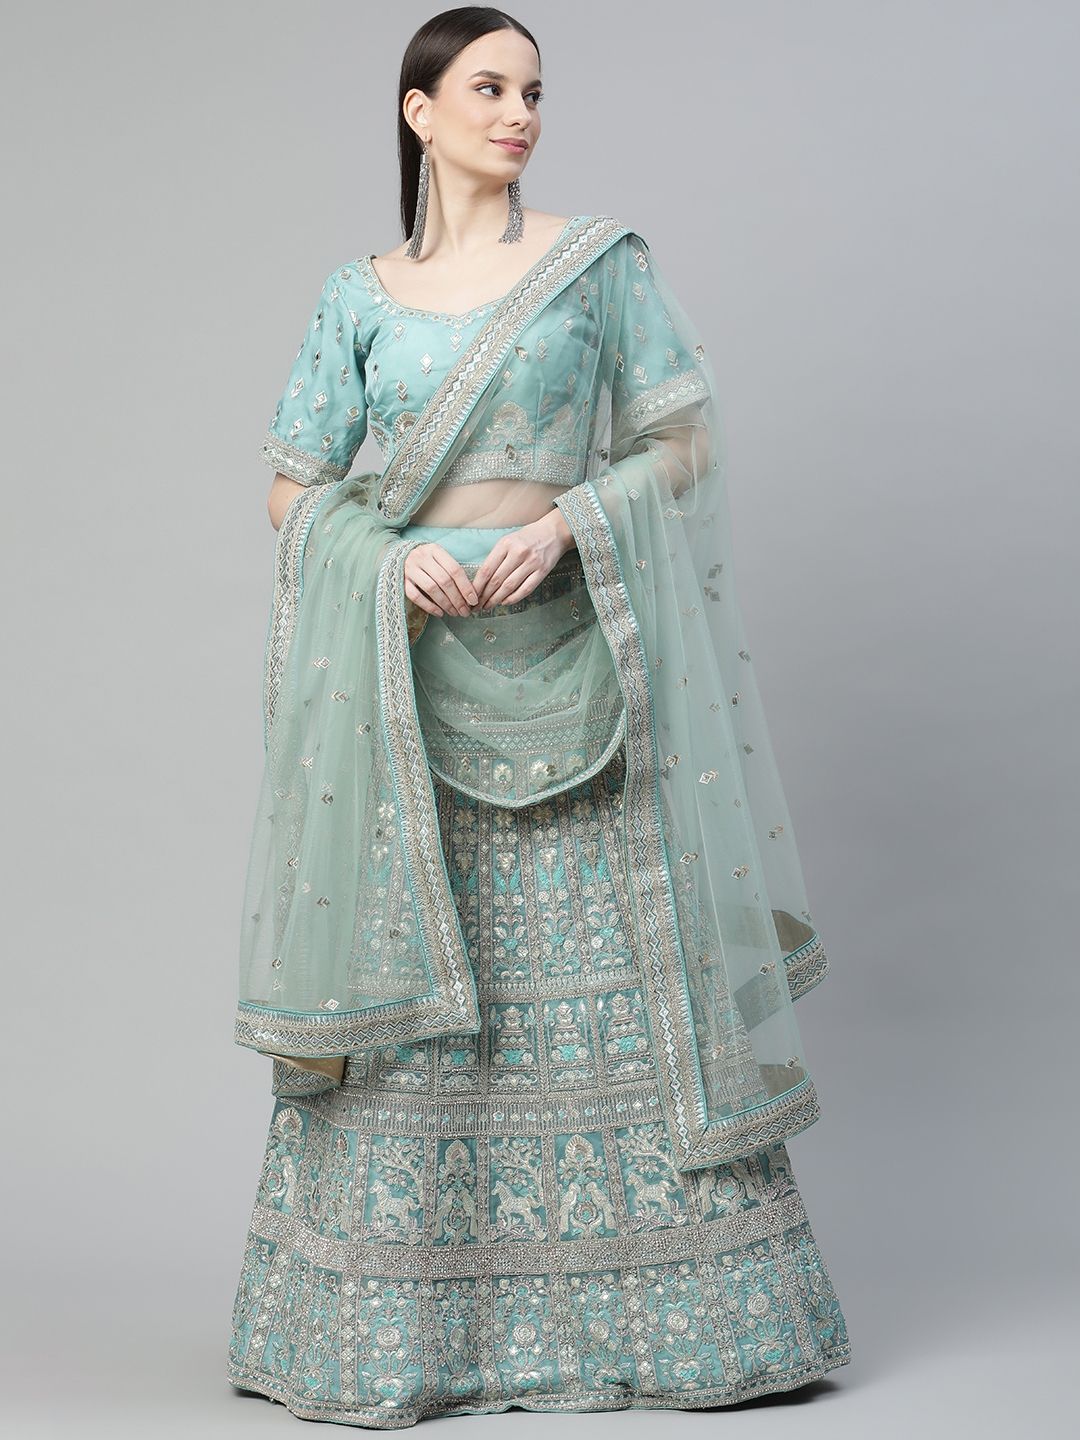 Readiprint Fashions Blue Embroidered Semi-Stitched Lehenga & Unstitched Blouse With Dupatta Price in India